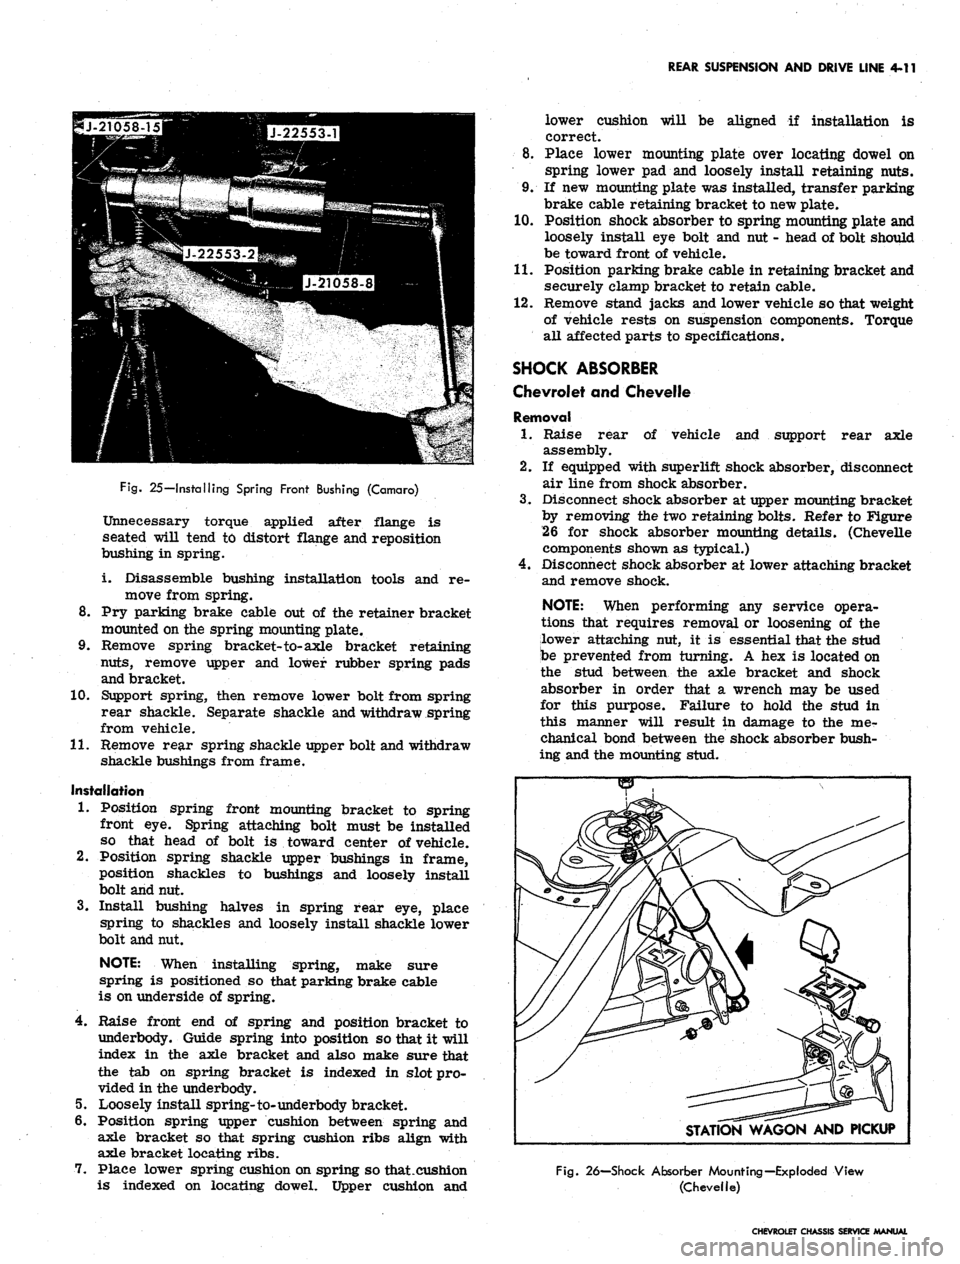 CHEVROLET CAMARO 1967 1.G Chassis Service Manual 
REAR SUSPENSION AND DRIVE LINE 4-11

lower cushion

correct. 
will be aligned if installation is

Fig.
 25—Installing Spring Front Bushing (Camaro)

Unnecessary torque applied after flange is

seat